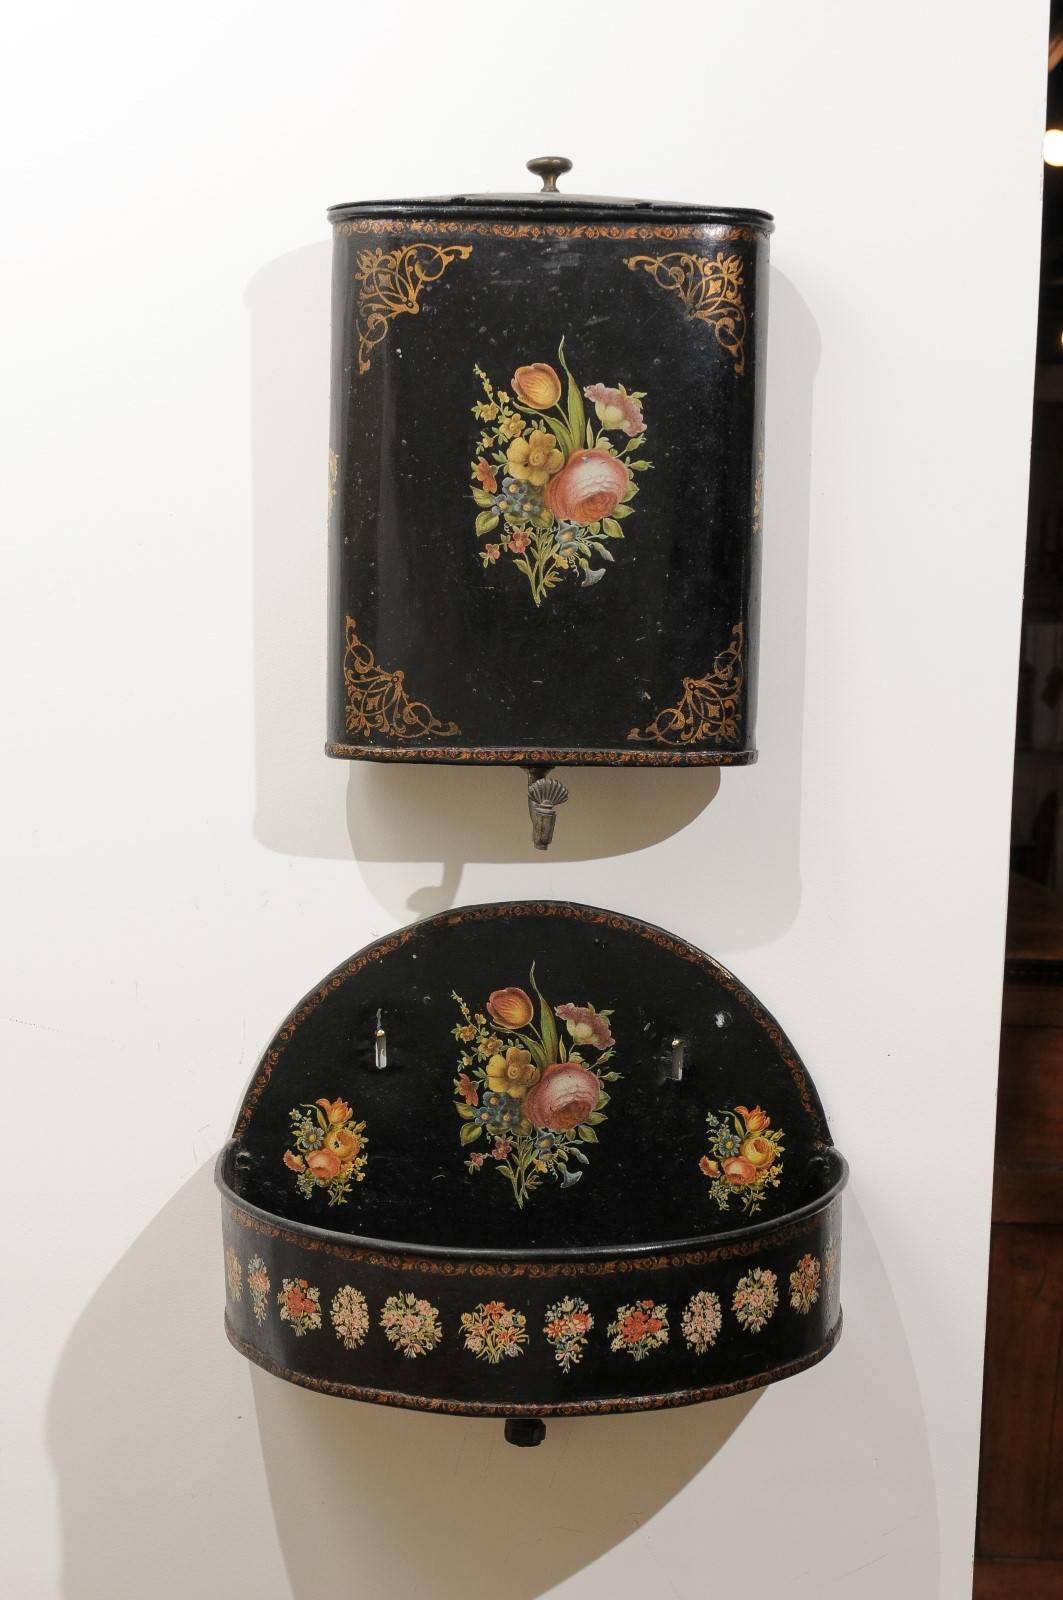 A French Napoleon III period painted tôle wall-mounted lavabo from the Ile-de-France region, second half of the 19th century. Born in the later years of the reign of Emperor Napoleon III, this French 'fontaine' features a black painted tôle body,